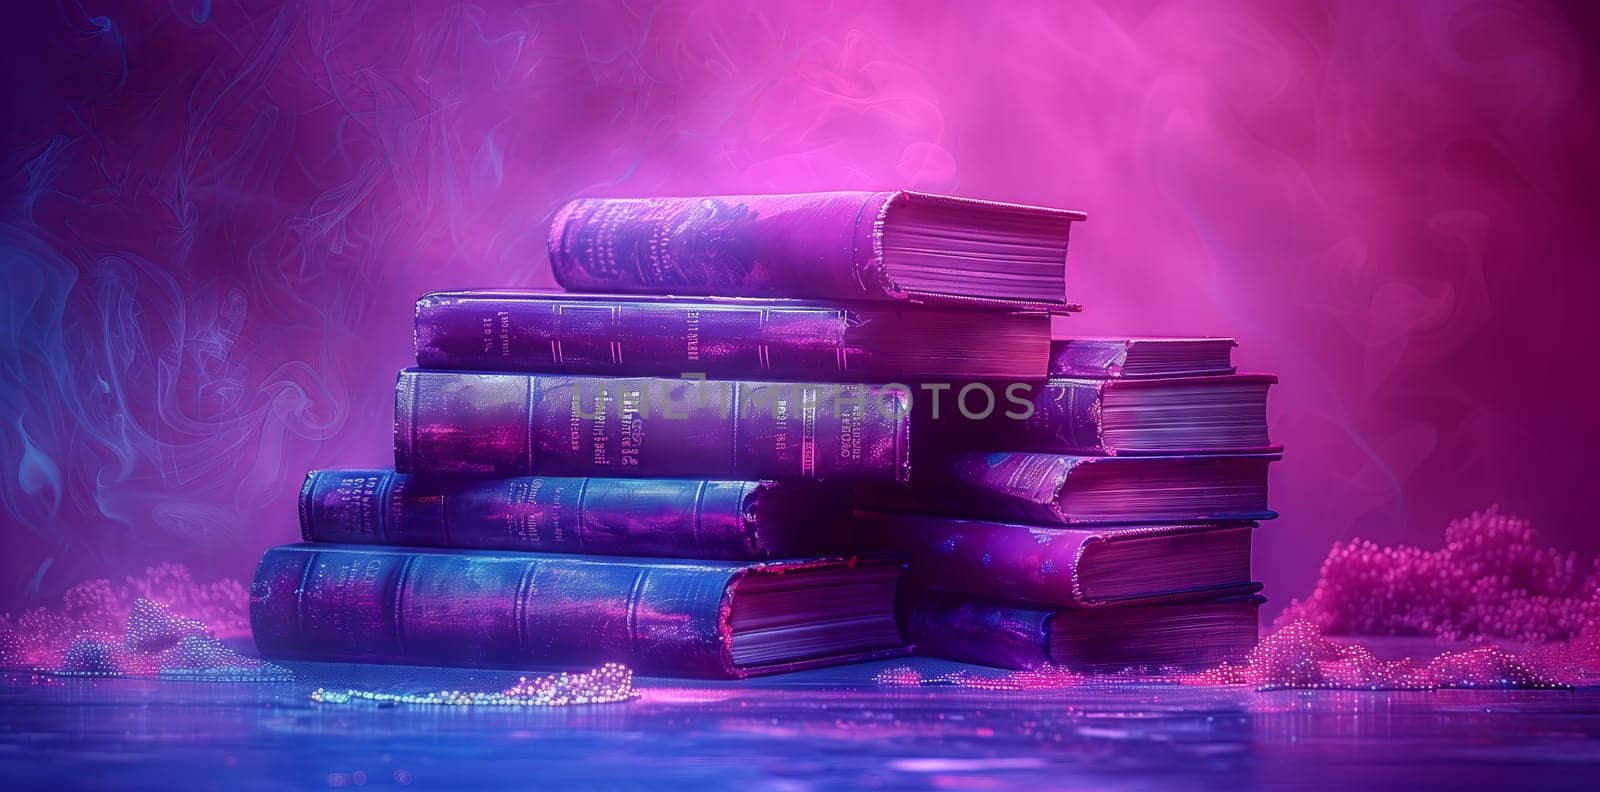 A stack of violet books on table, like a liquid wave in a landscape of words by richwolf